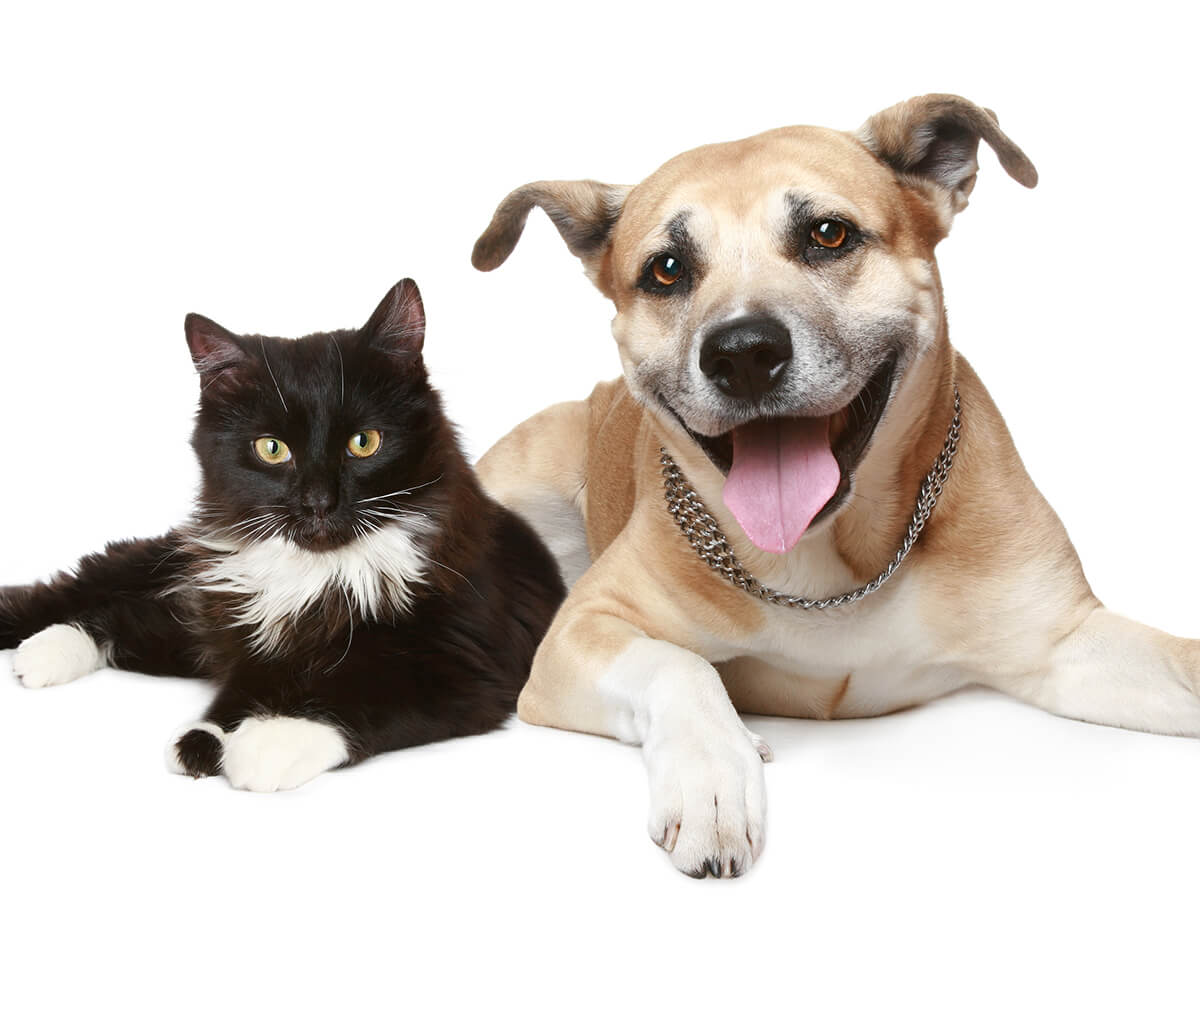 Recommended preventive care services for your pet